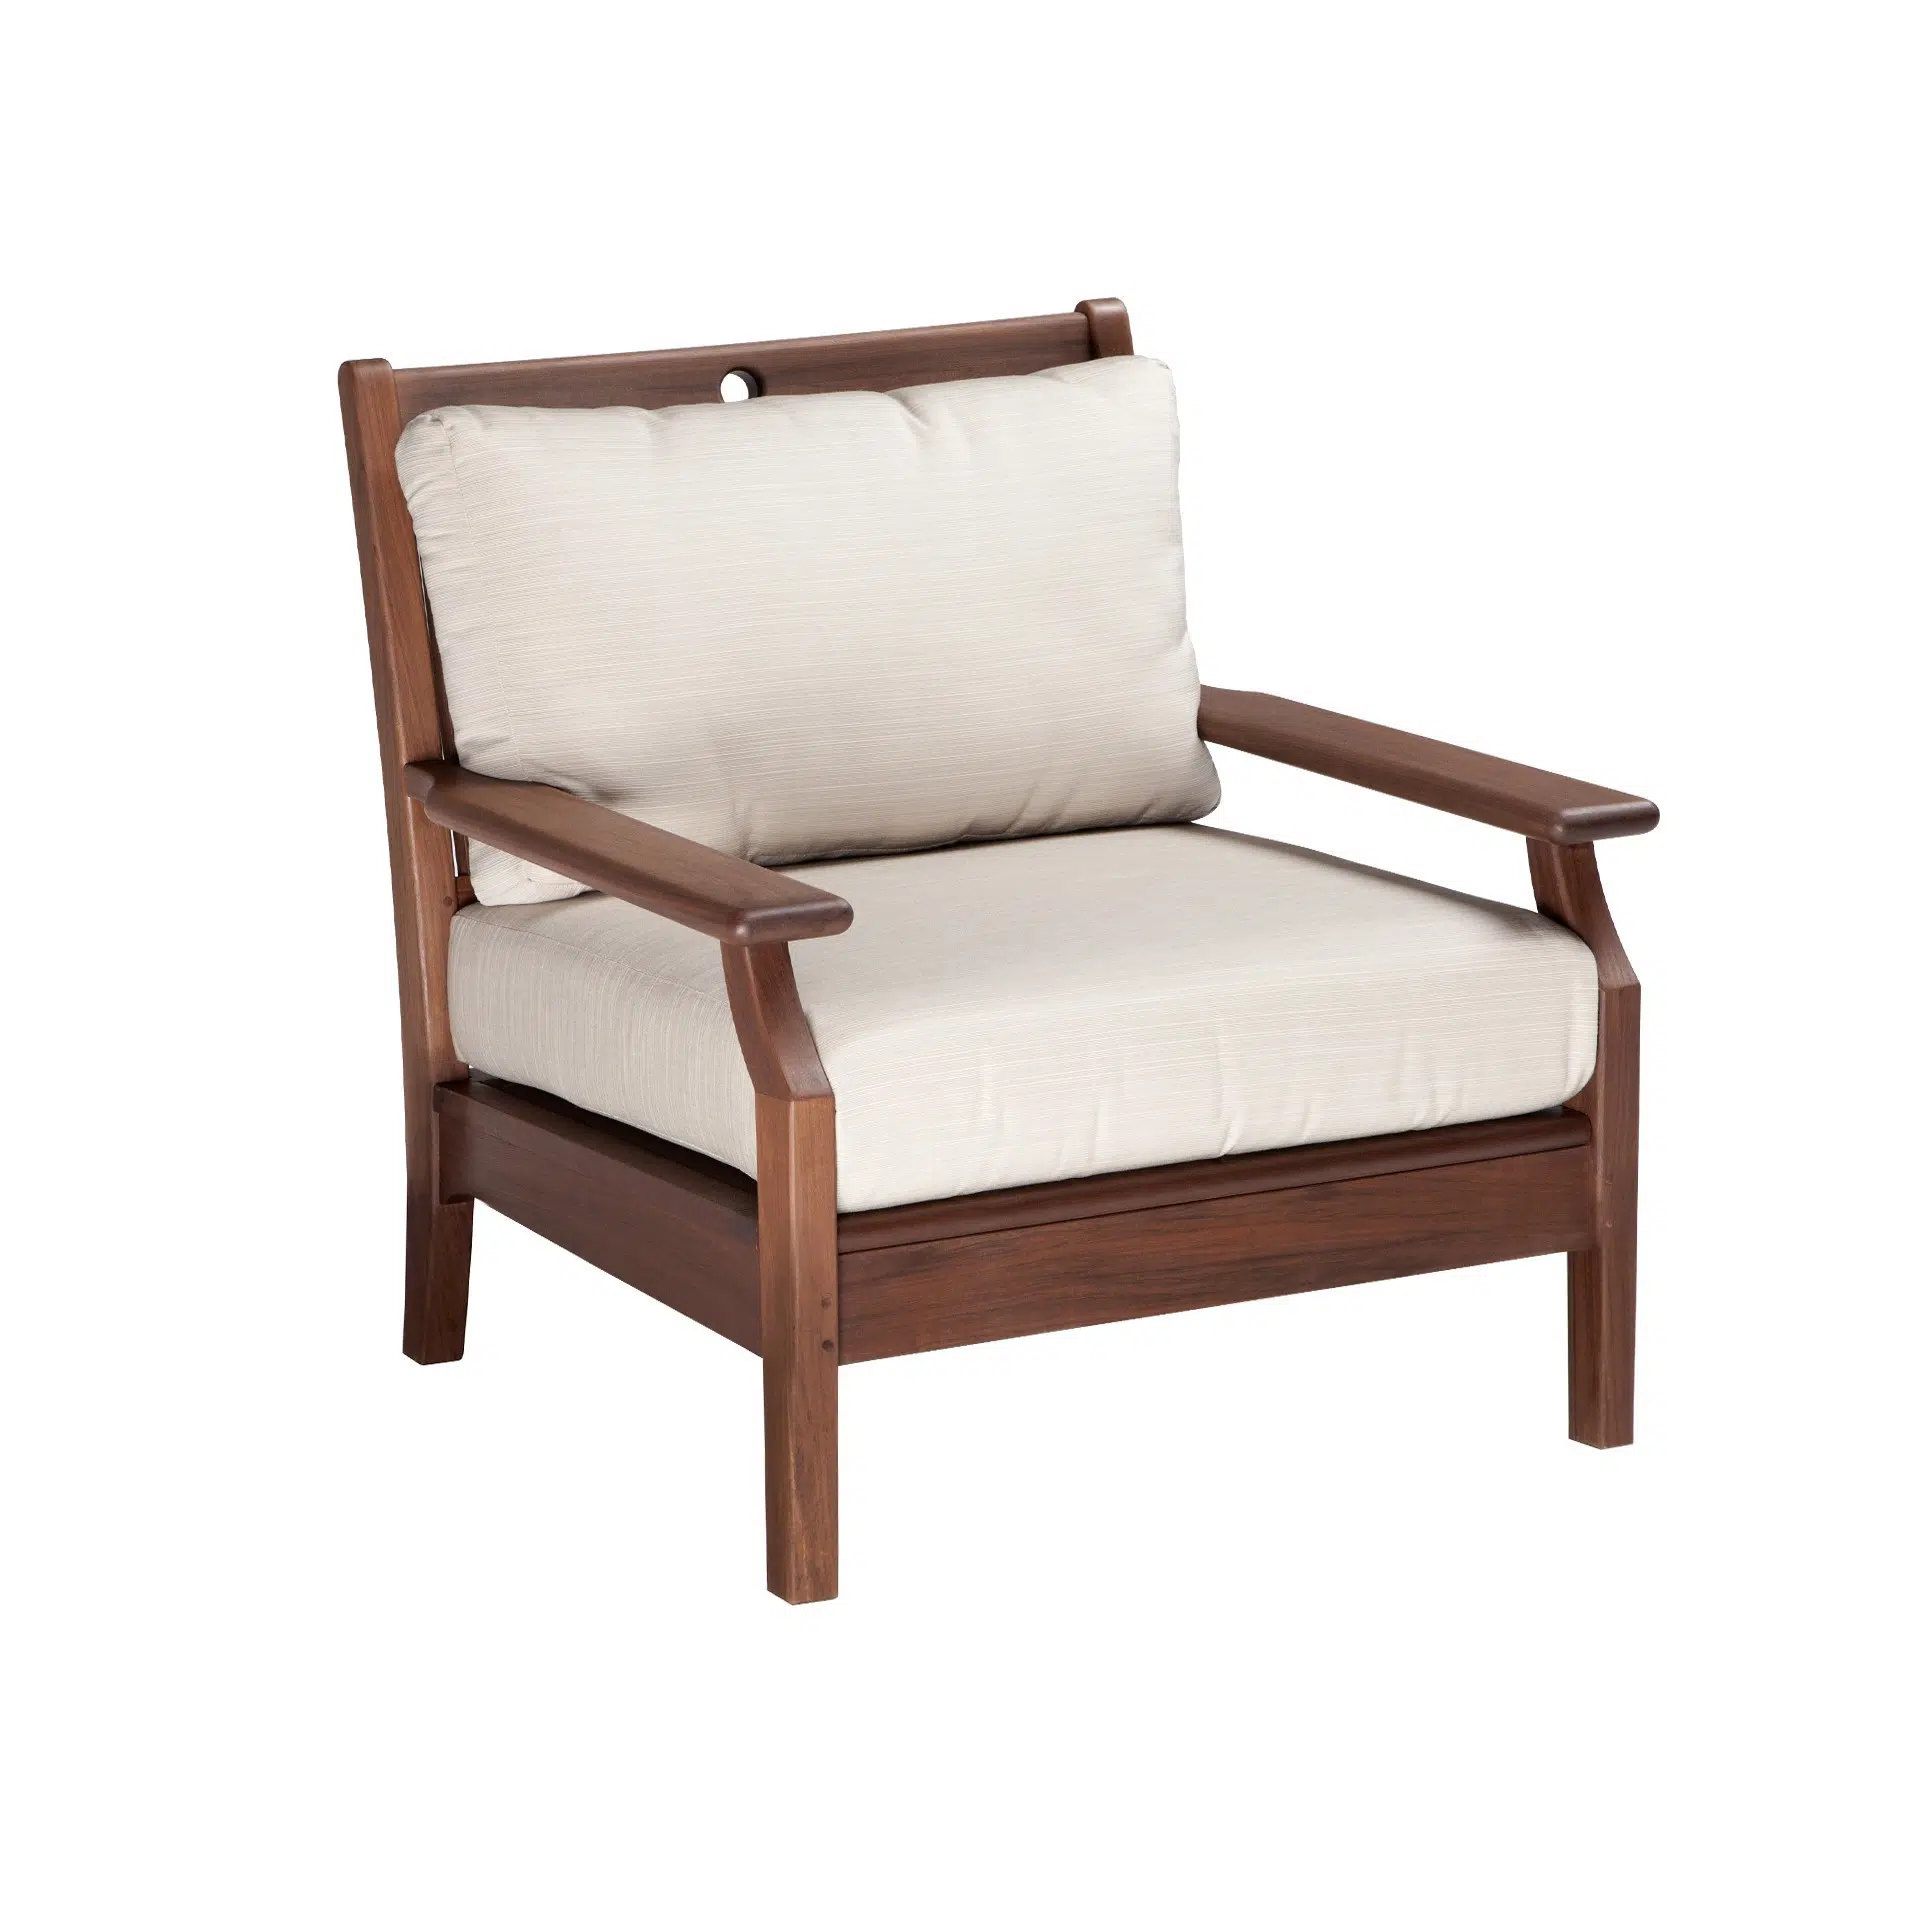 Opal loung chair from hausers patio hausers patio